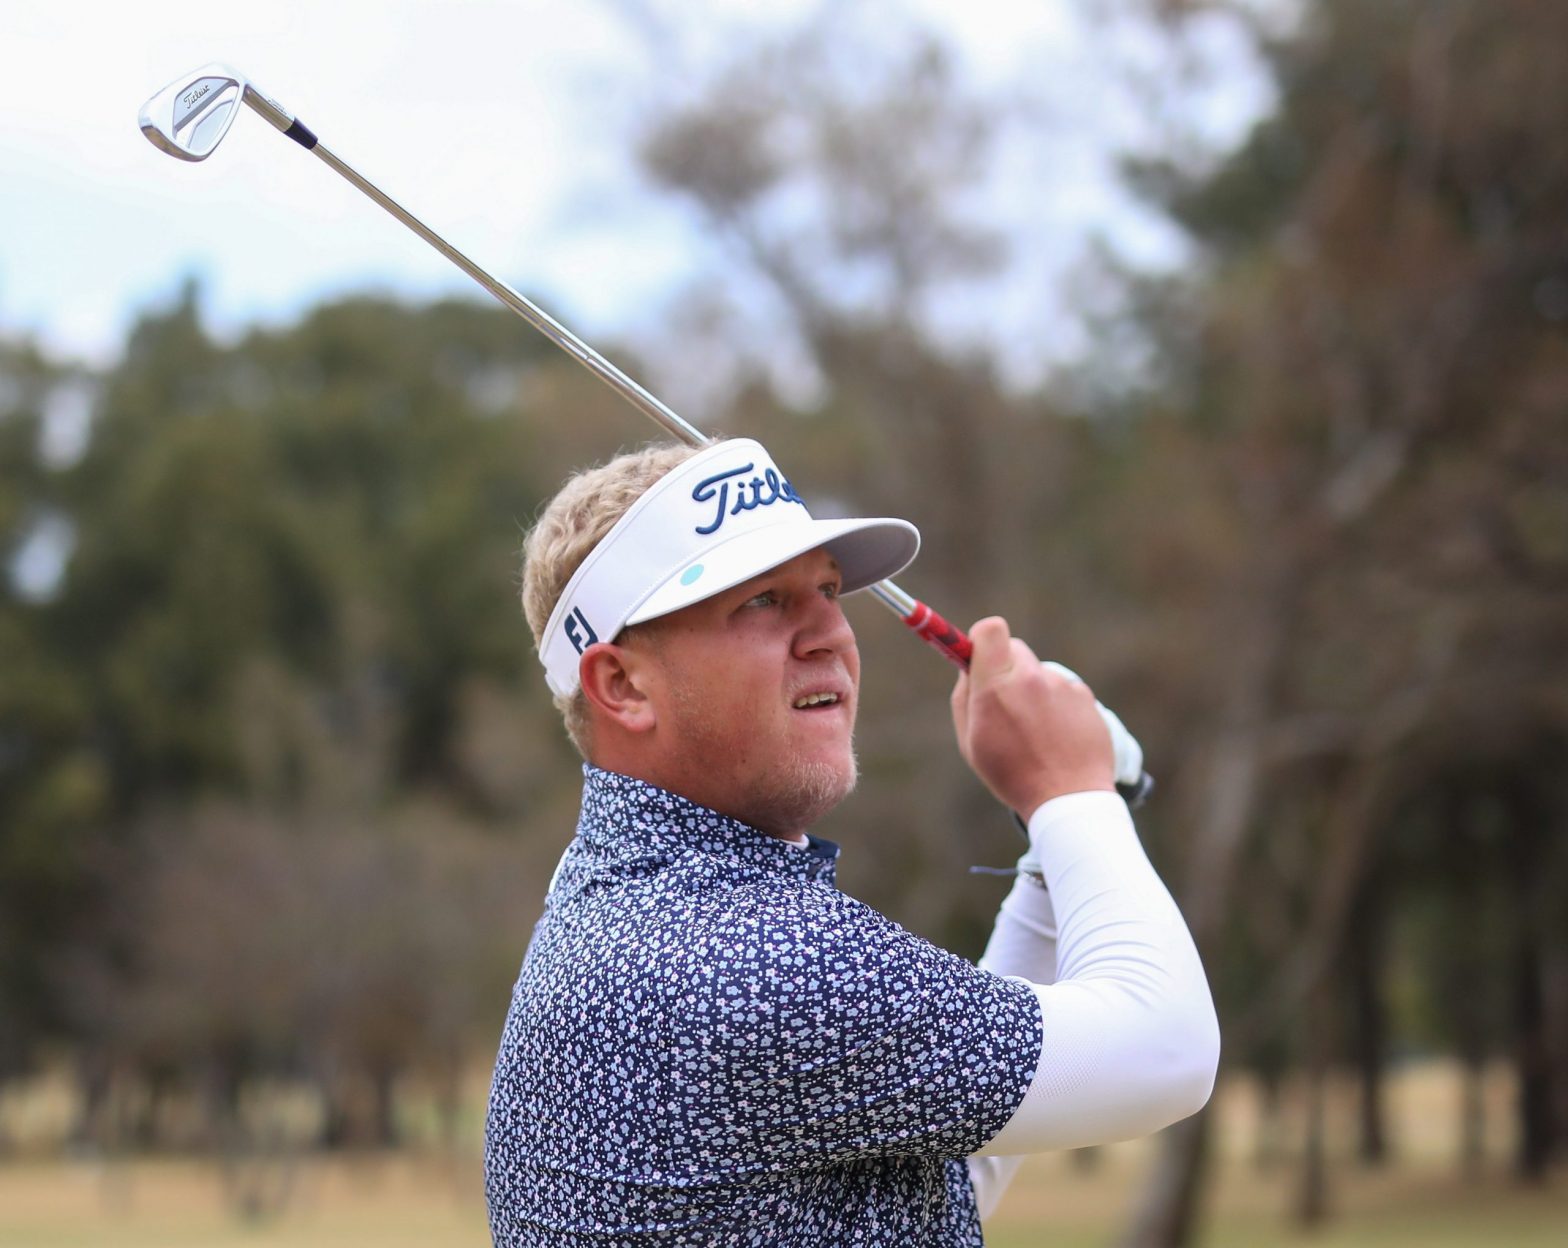 Strydom joins his hero Coetzee in chase for victory